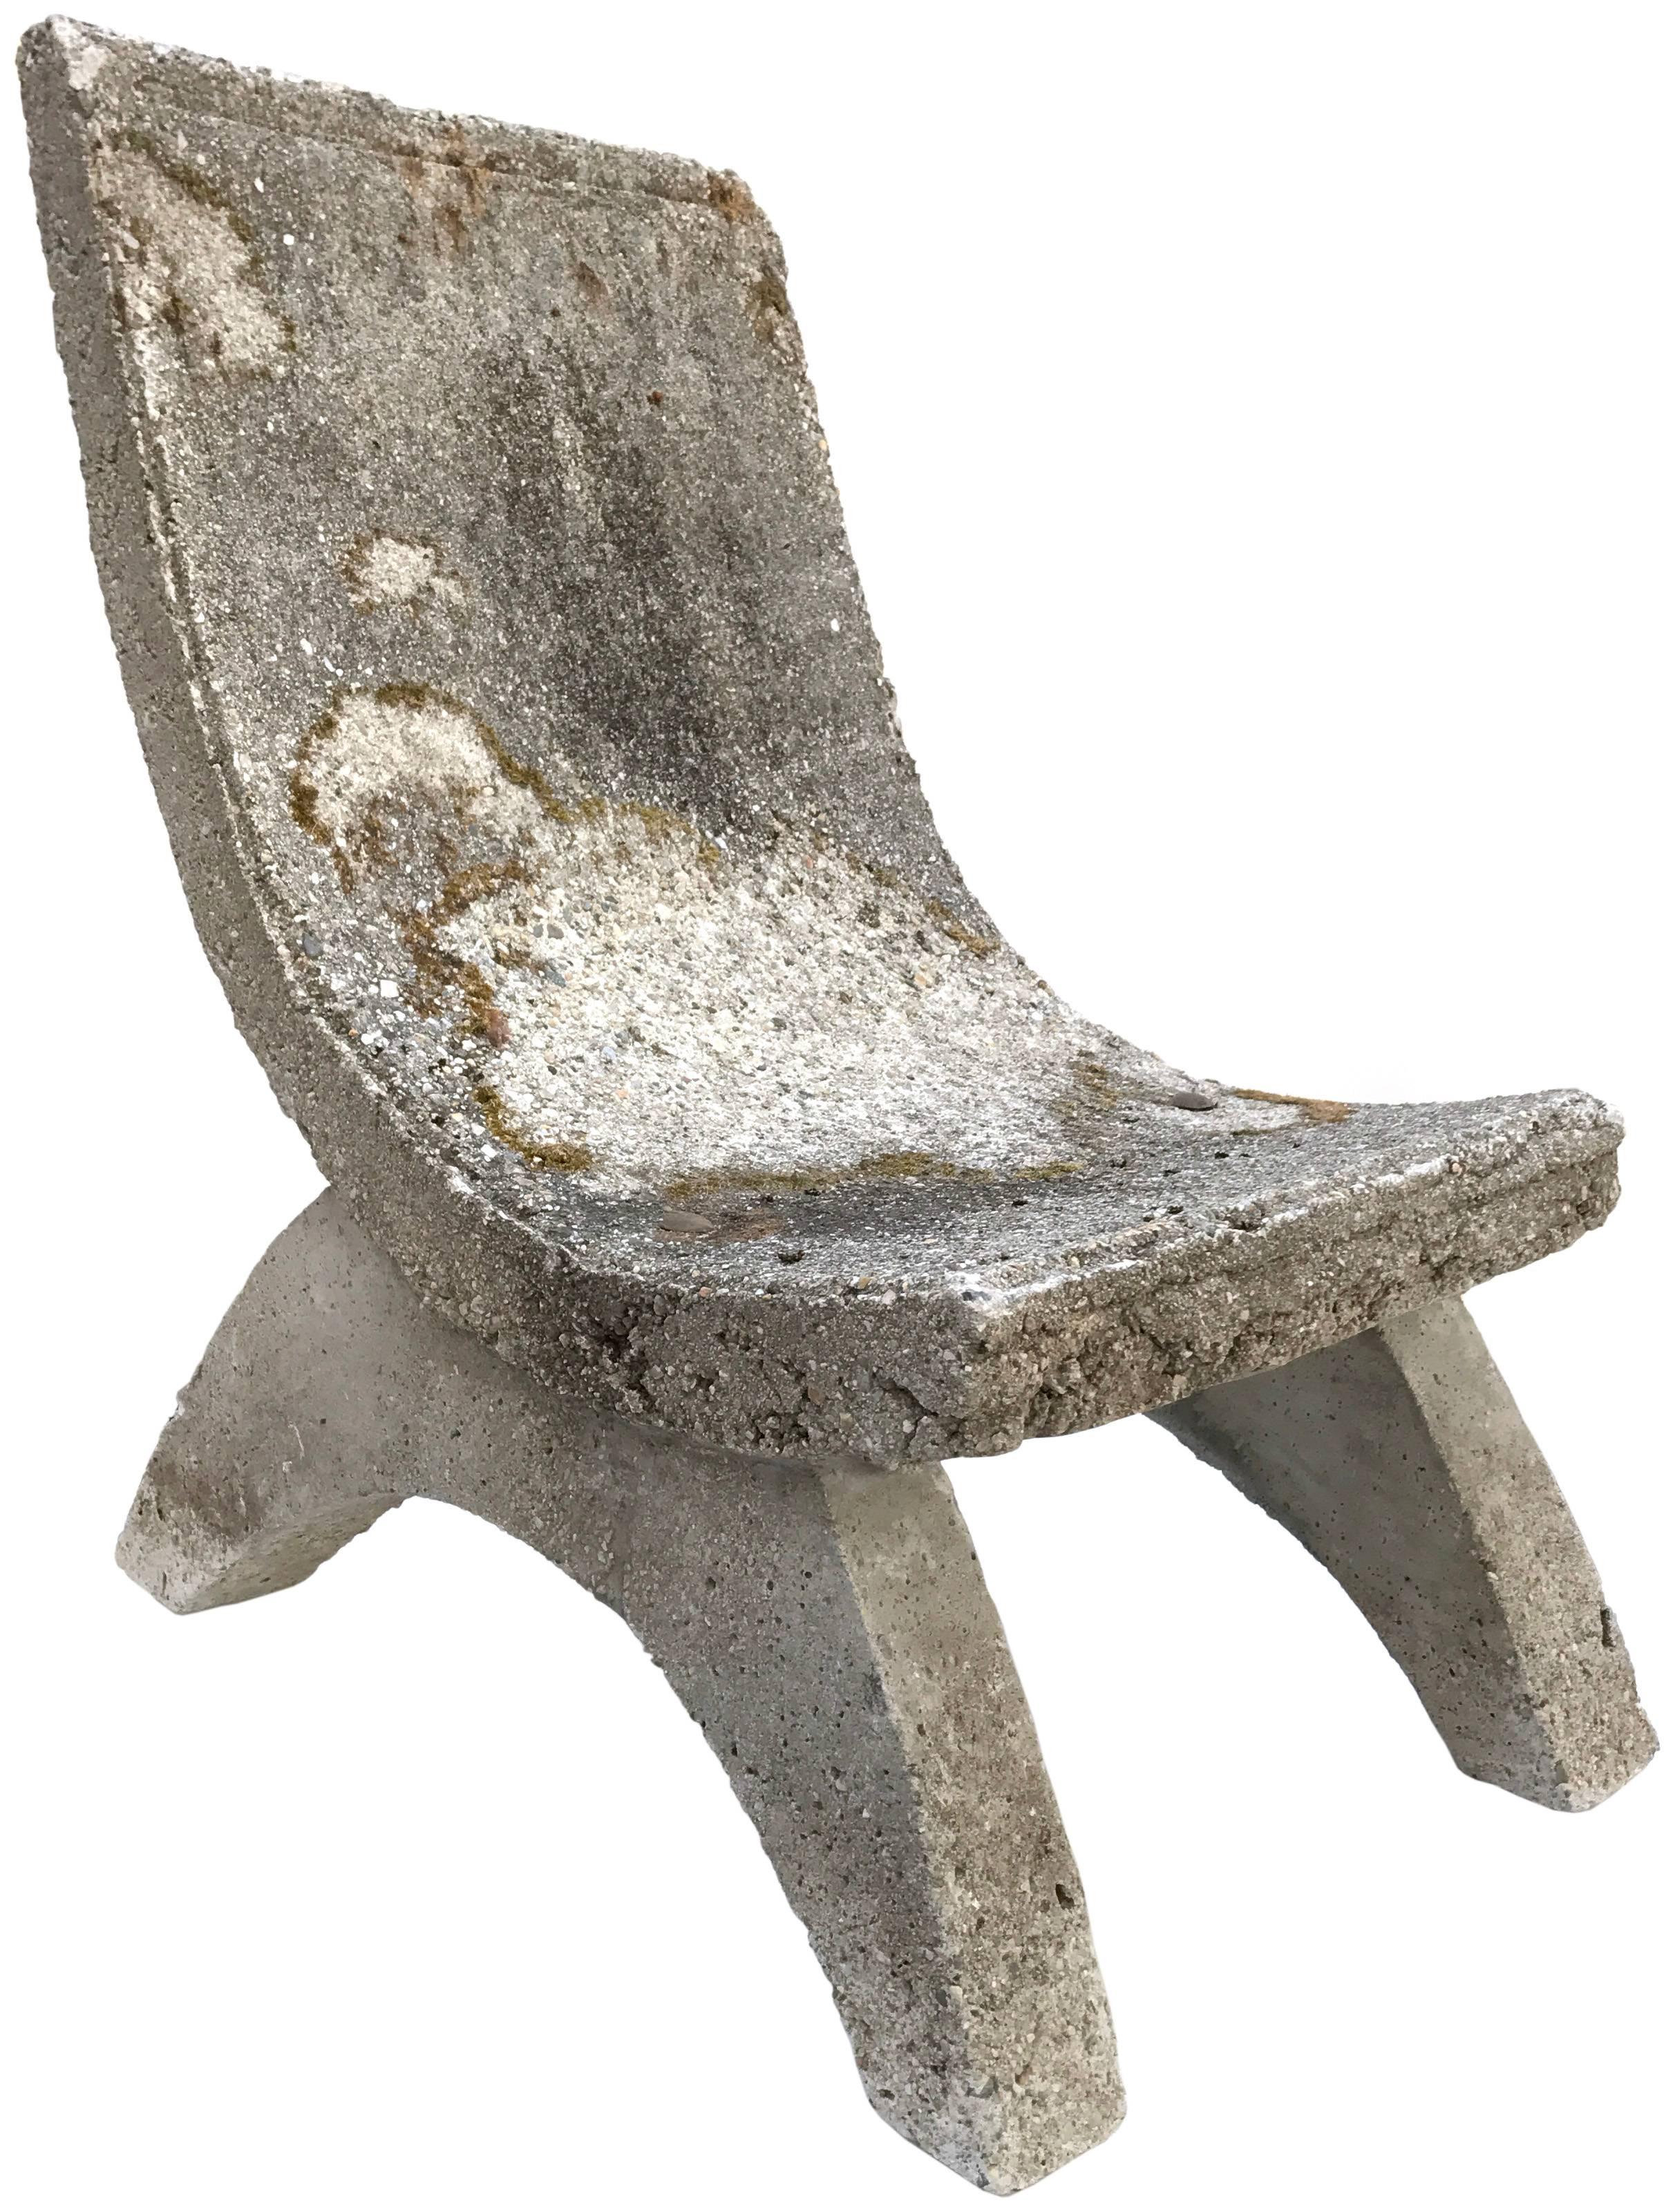 A monumental cast concrete garden chair. An architectural form with a dramatic, sloping seat resting on widely splayed, arch leg-structures. Incredible, impressive scale and proportions. Great patina and textured surface from years of life outdoors.